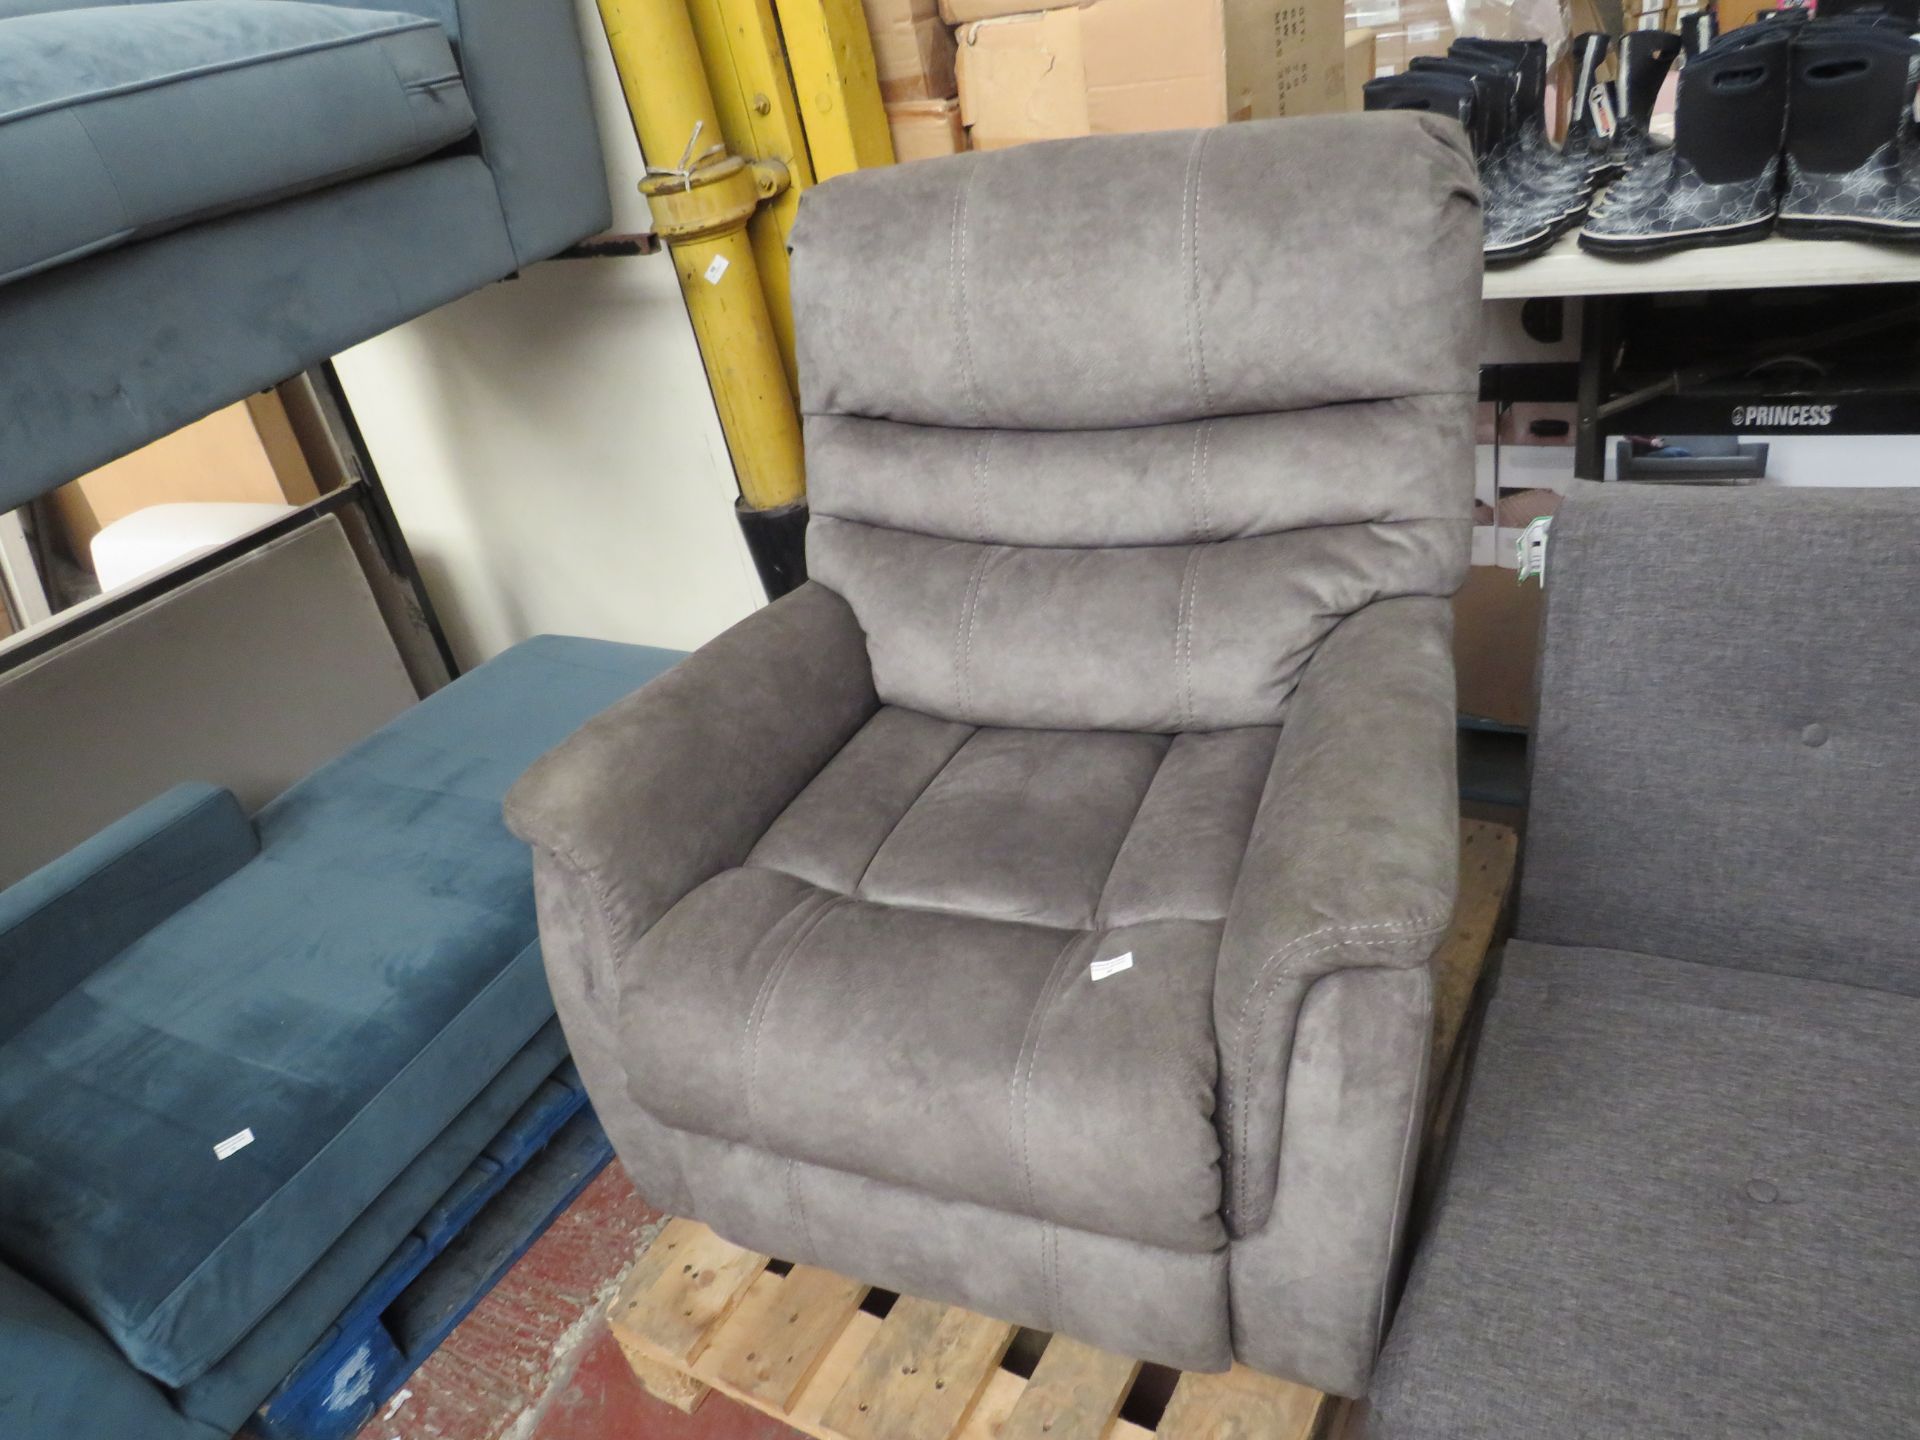 | 1X | THOMASVILLE LAZY BOY ARM CHAIR | SOFT GREY BENSON LEATHER | UNCHECKED |